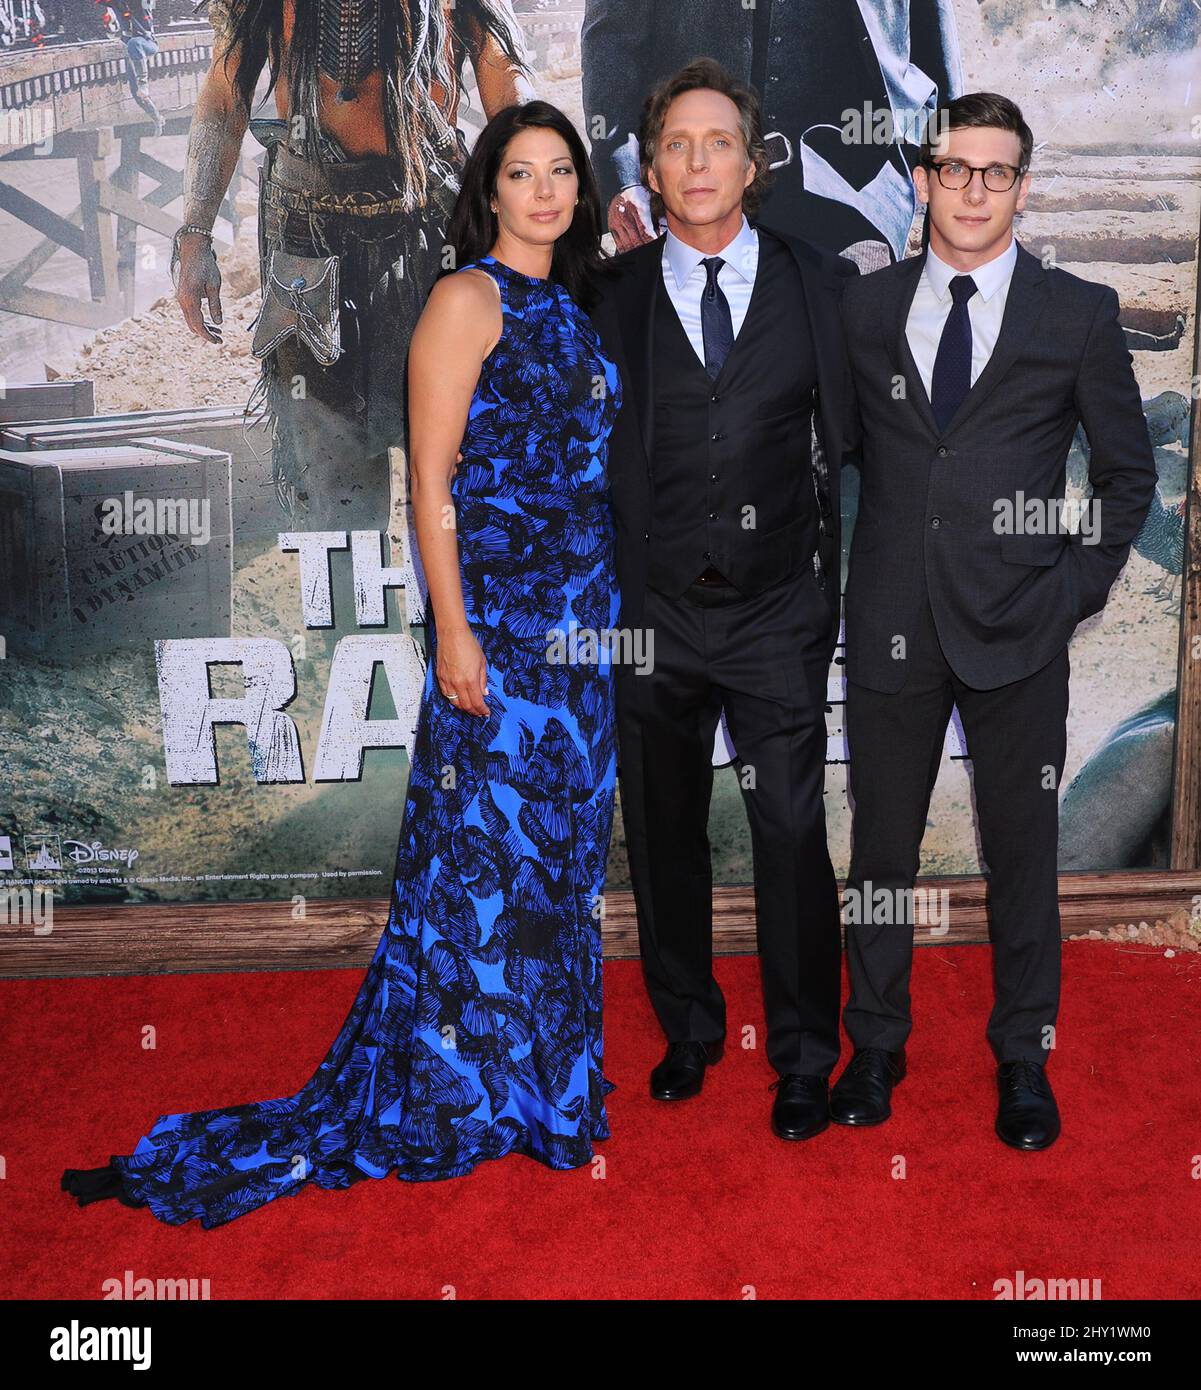 Kymberly Kalil, William Fichtner and Sam Fichtner attending 'The Lone Ranger' World Premiere at California Adventure in Los Angeles, USA. Stock Photo